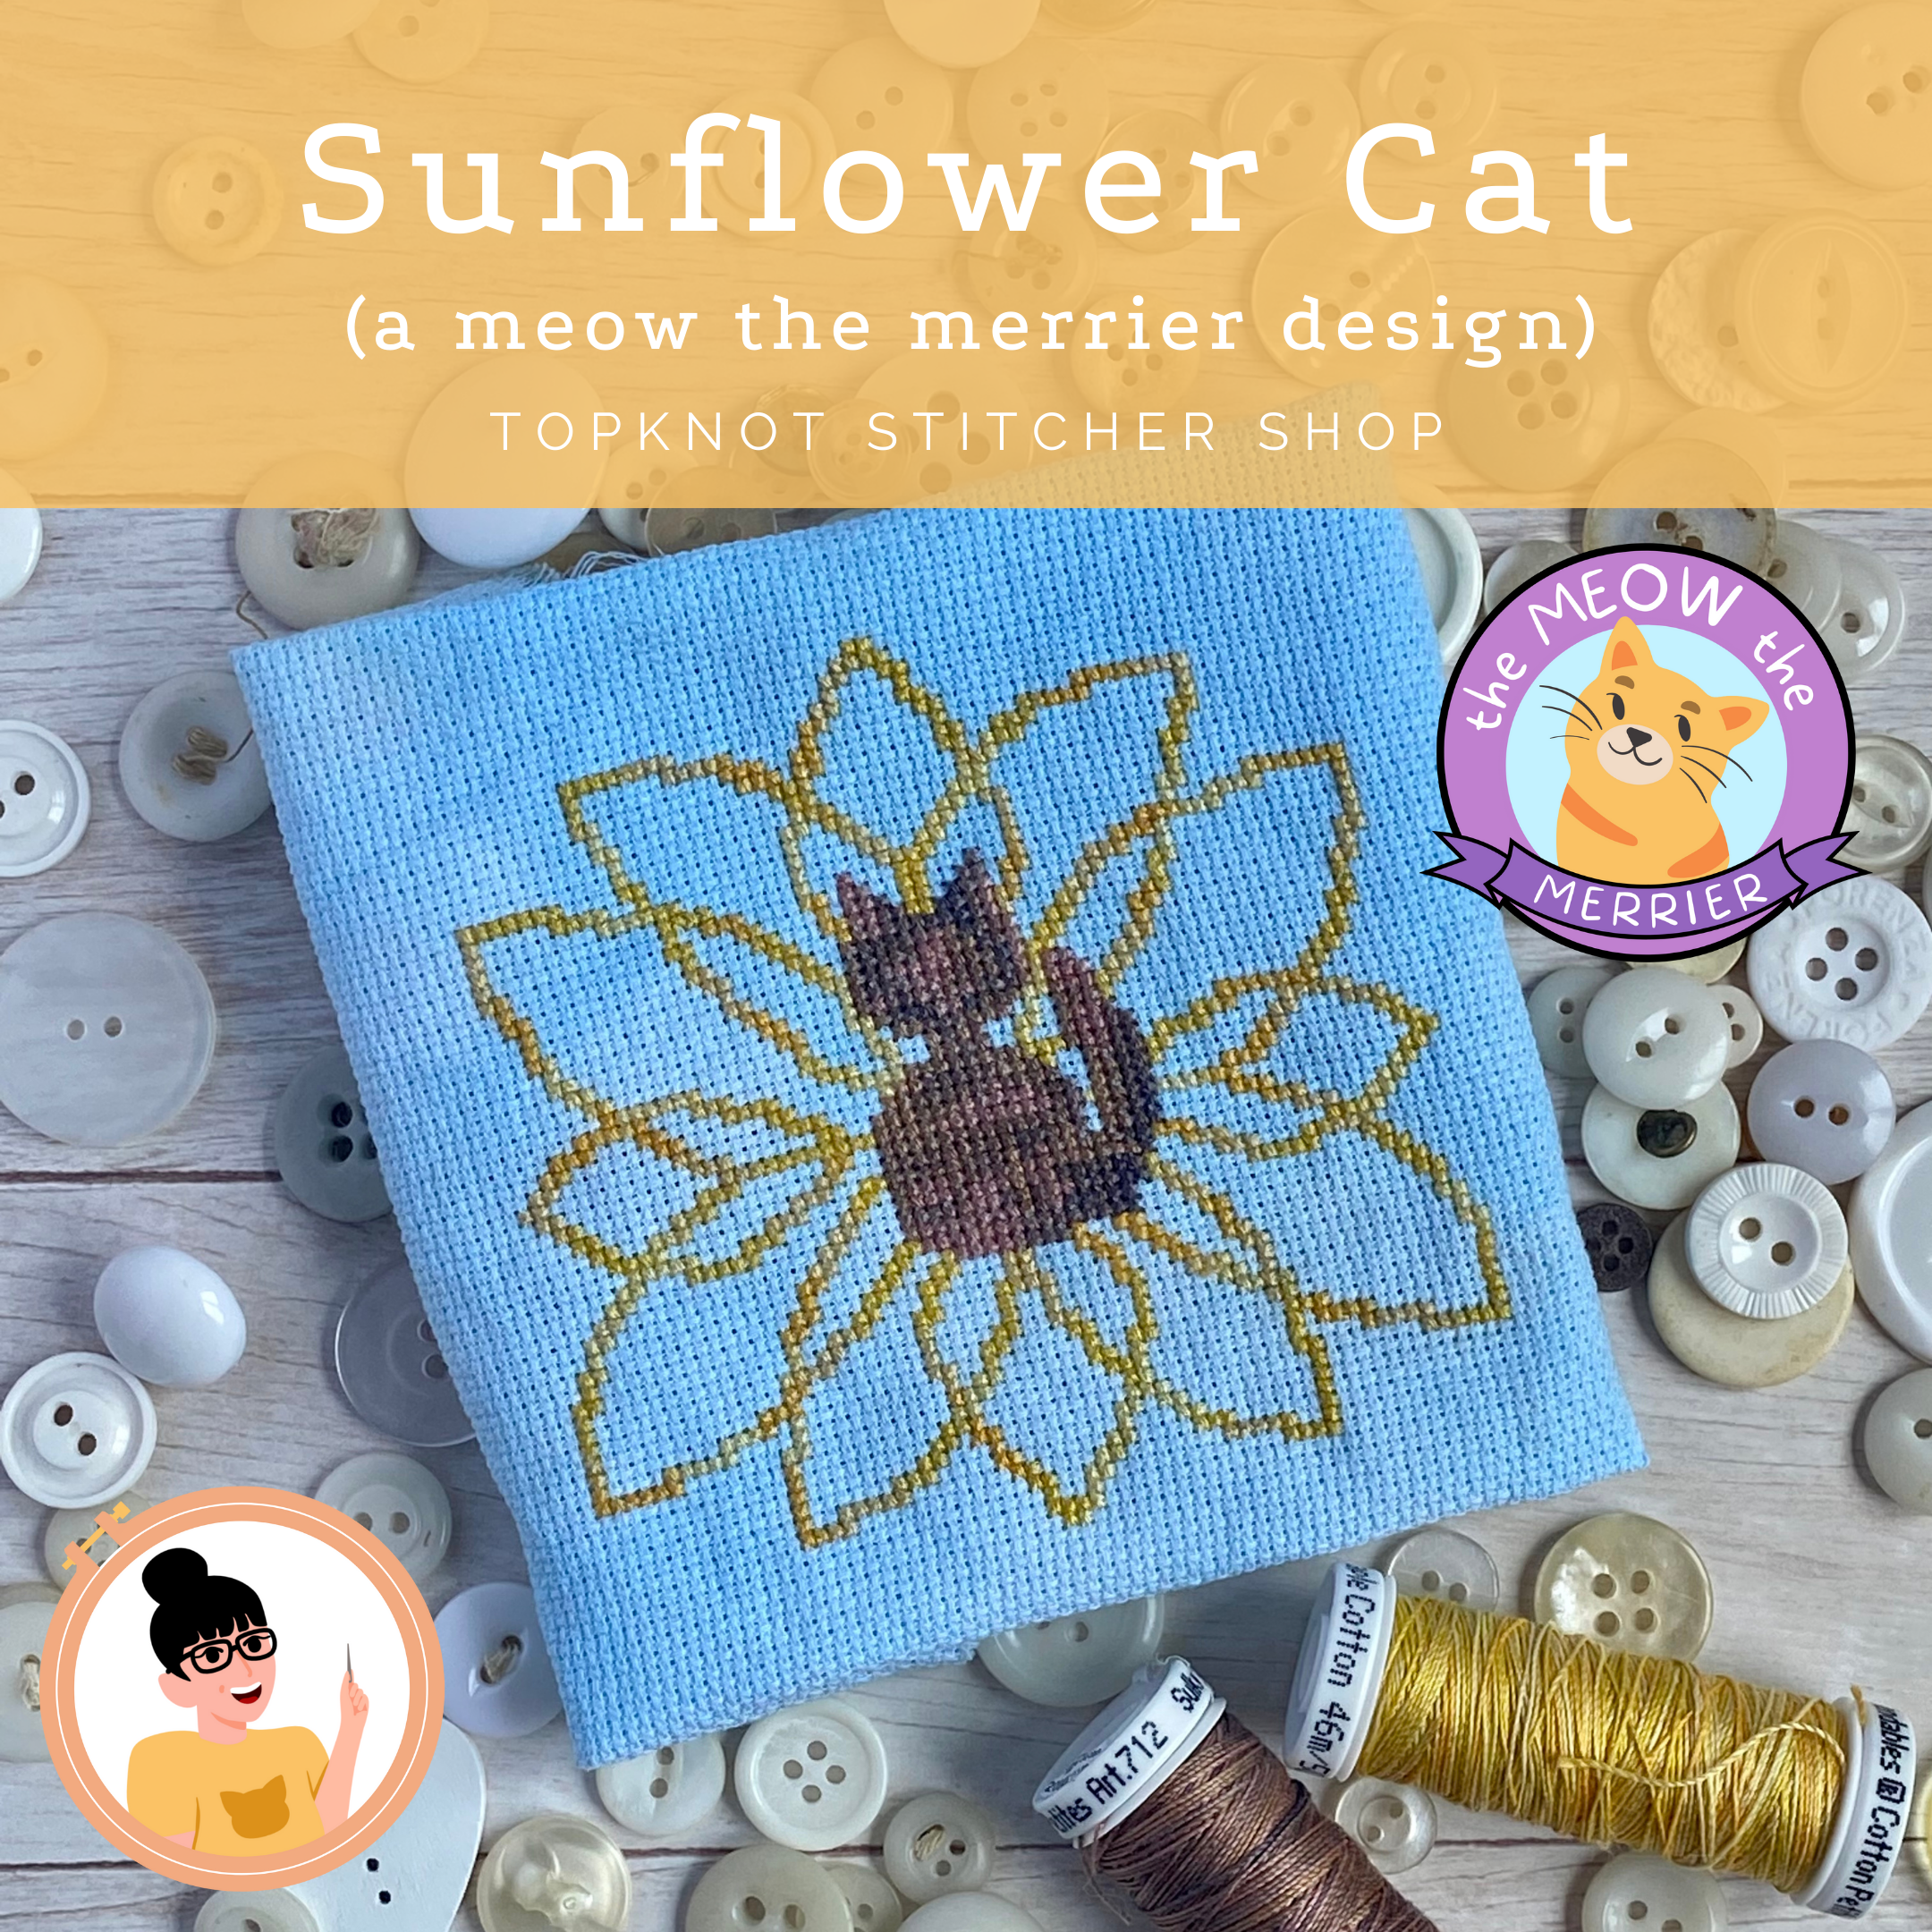 Sunflower Cat - The Meow The Merrier | TopKnot Stitcher Shop - Printed Pattern